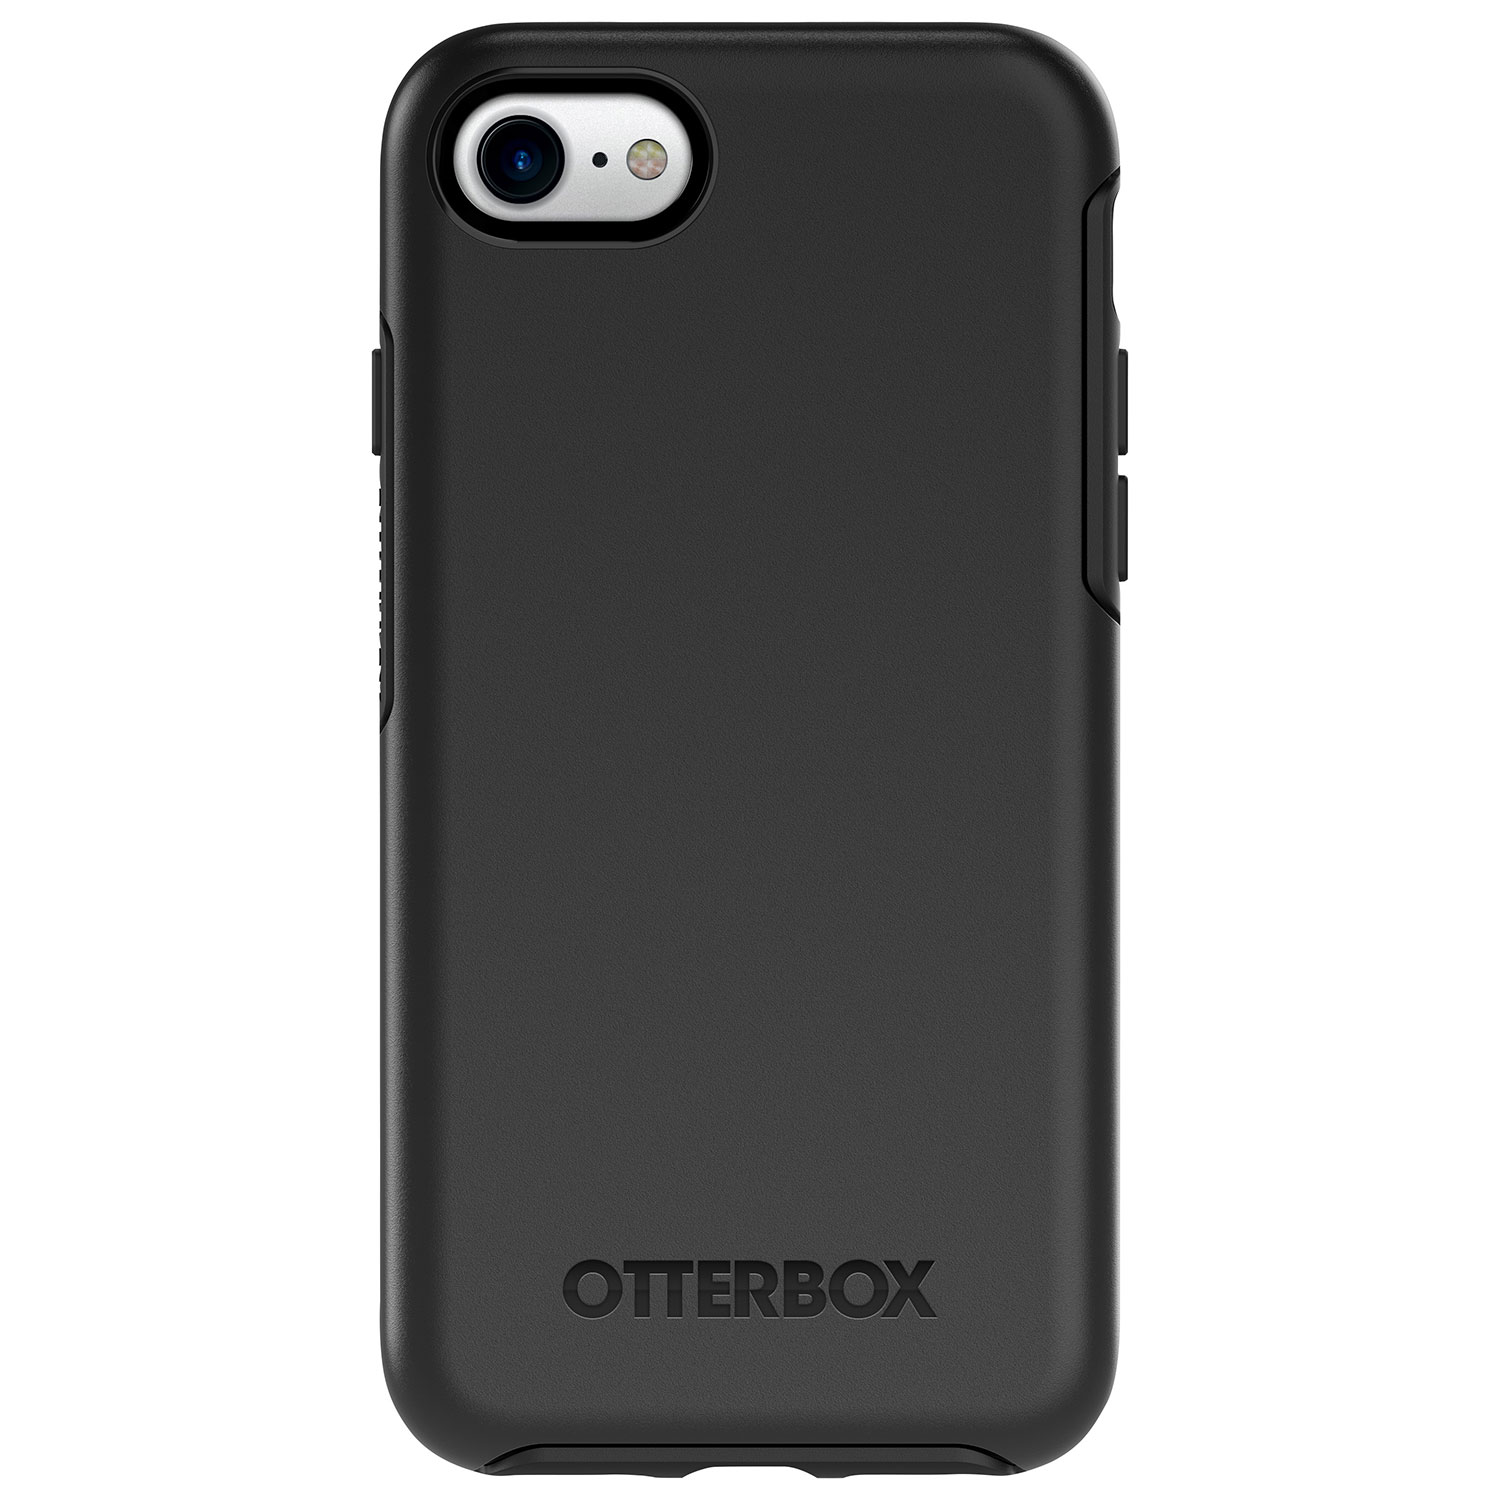 OtterBox Symmetry Fitted Hard Shell Case for iPhone SE (3rd/2nd Gen)/8/7 - Black